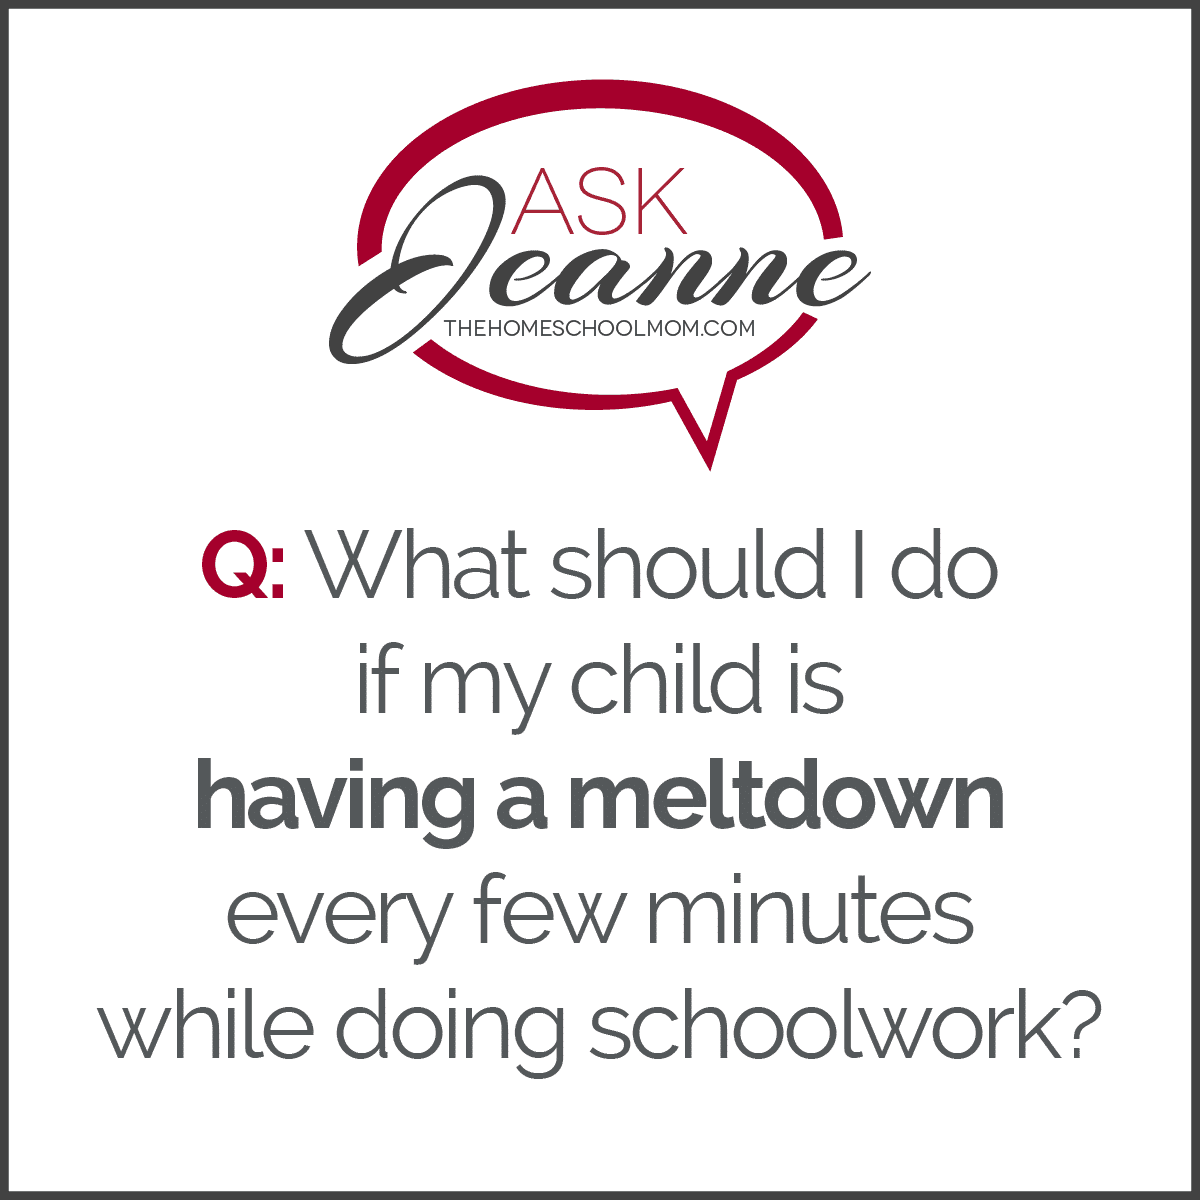 Ask Jeanne: What should I do if my child is having a meltdown every few minutes while doing schoolwork?